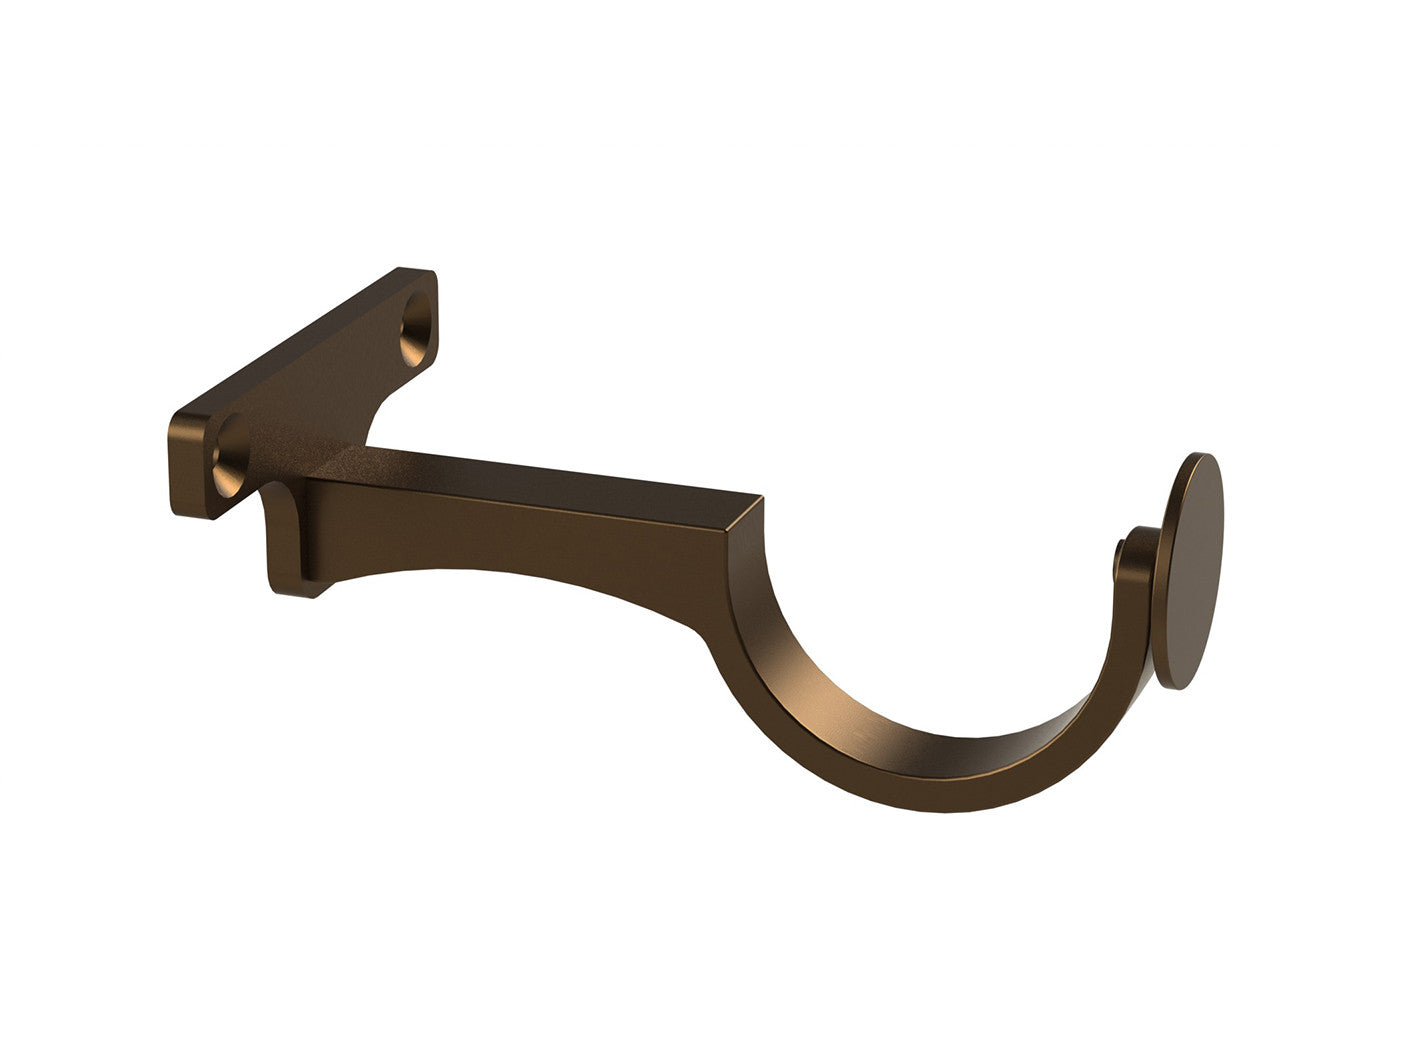 classic centre bracket in brushed bronze by Walcot House